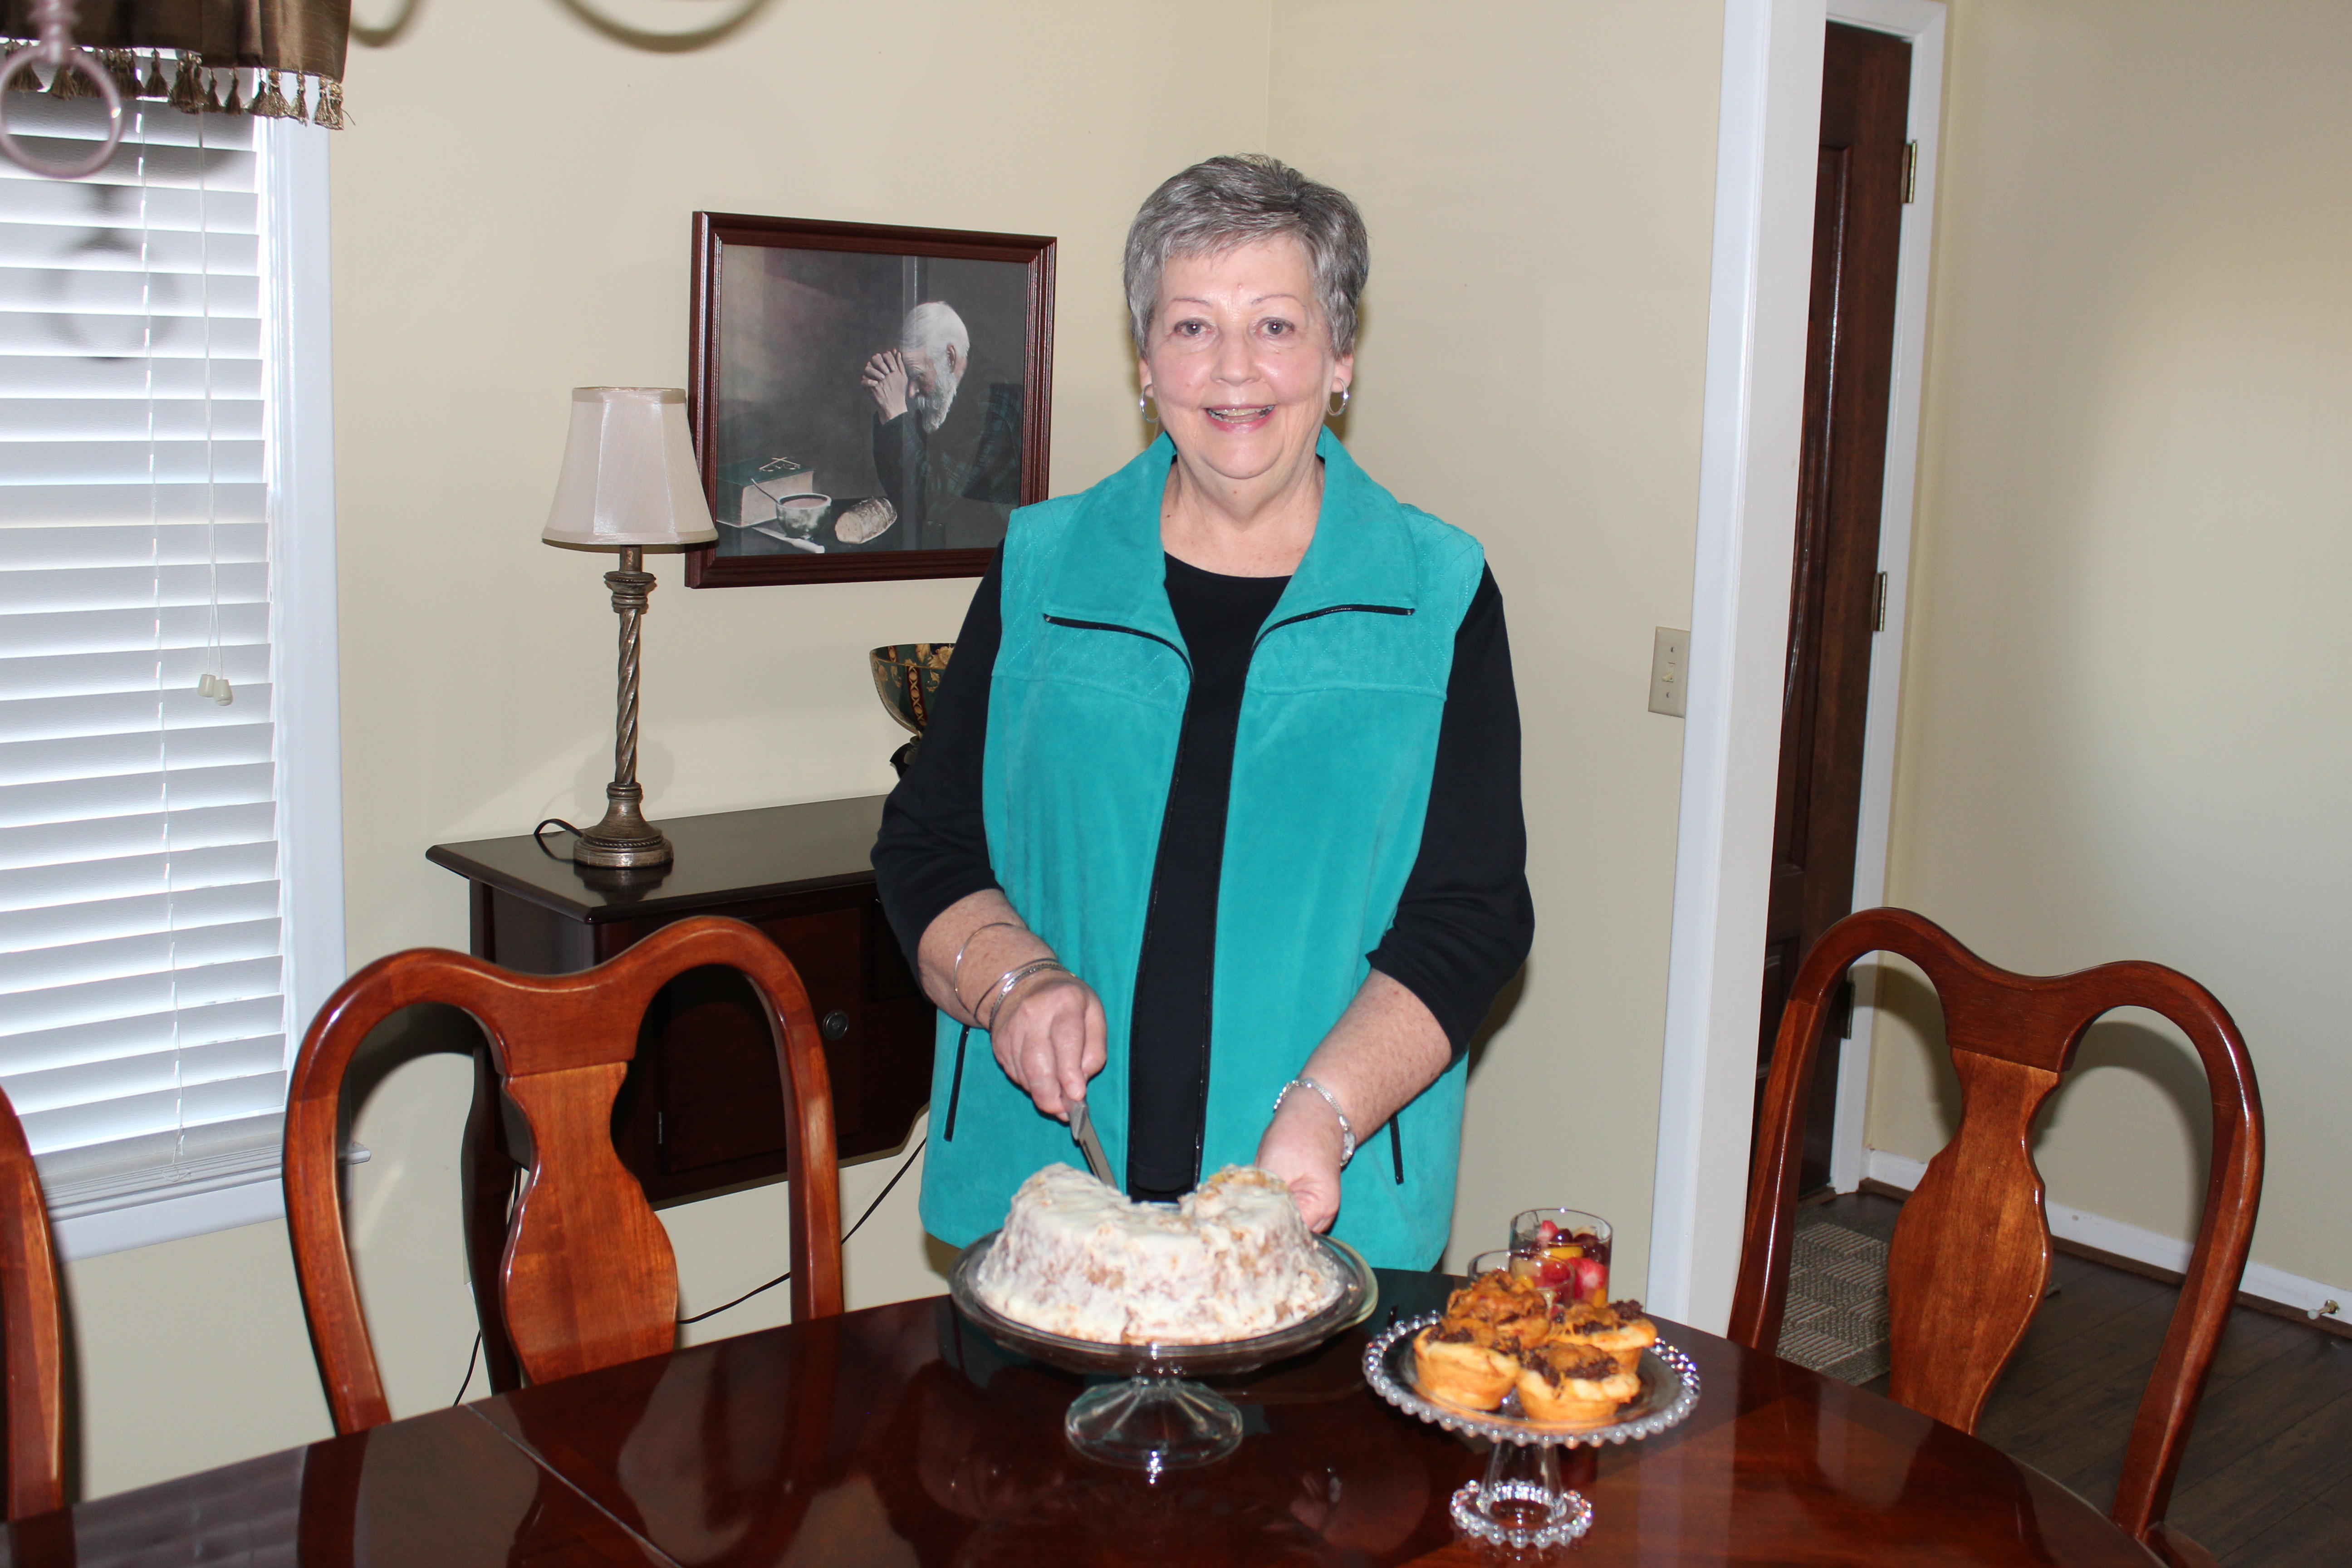 Patsy Bond enjoys cooking quick, easy dishes